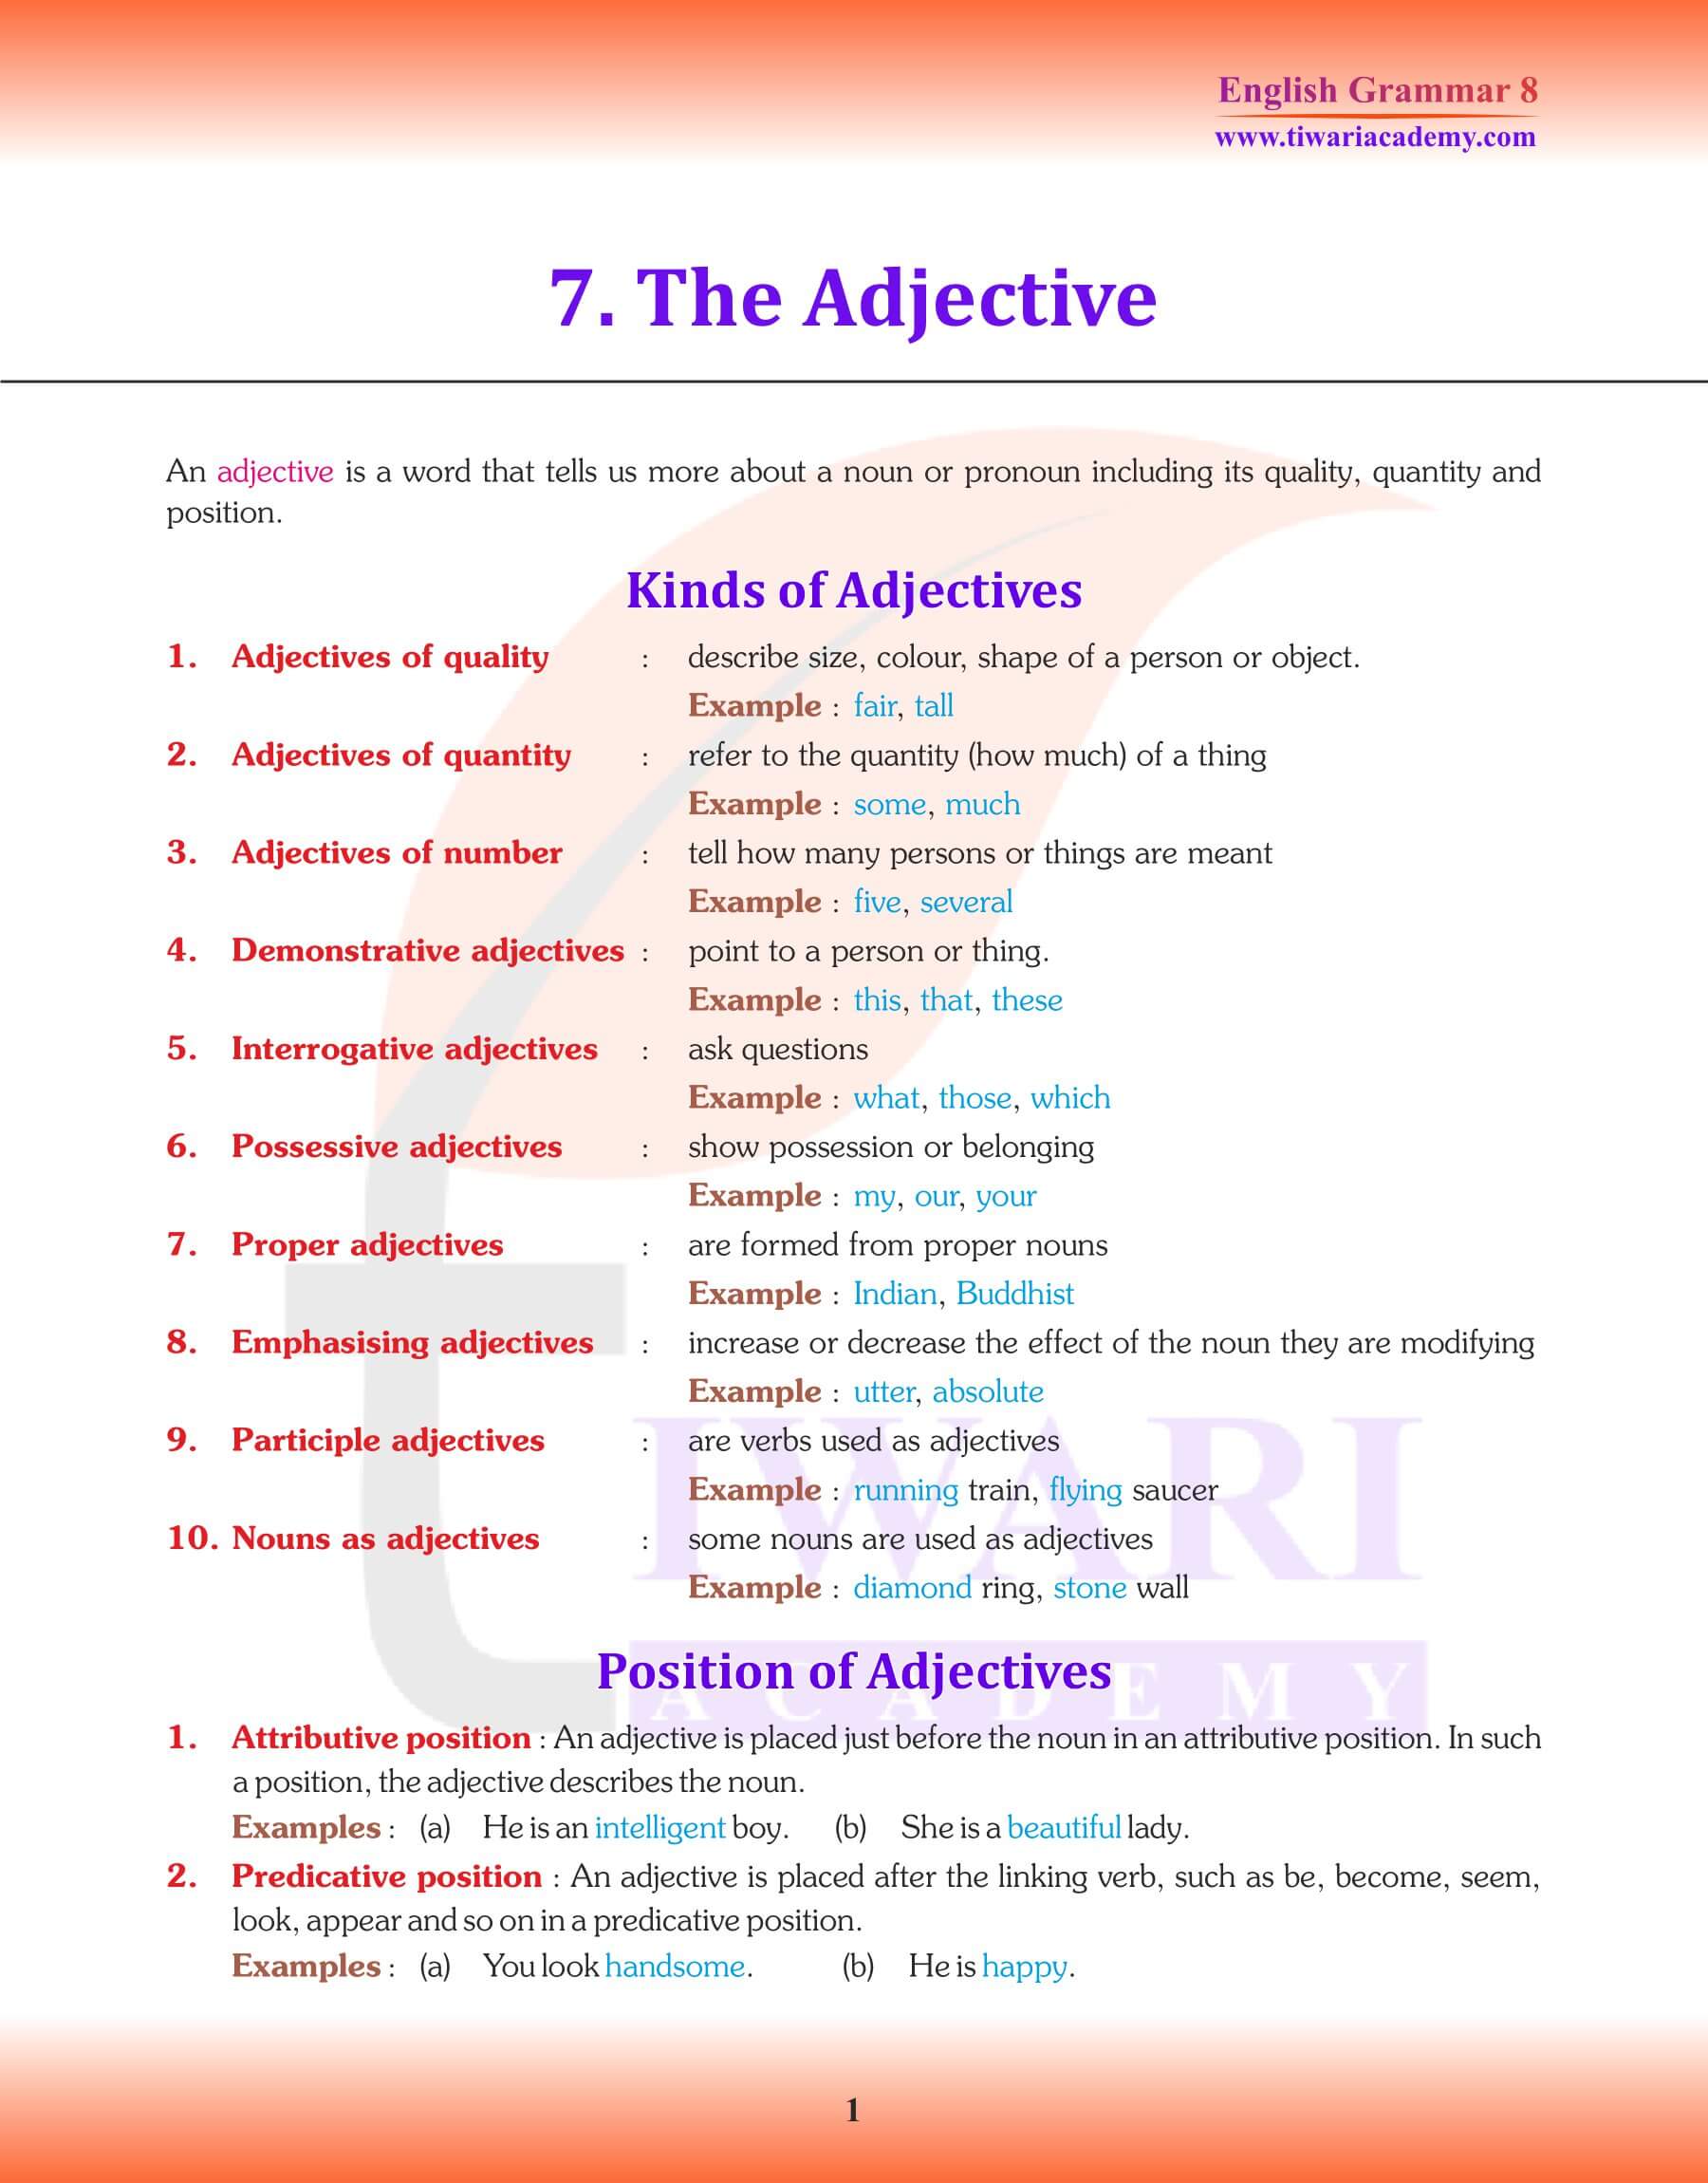 Class 8 English Grammar forms of Adjective